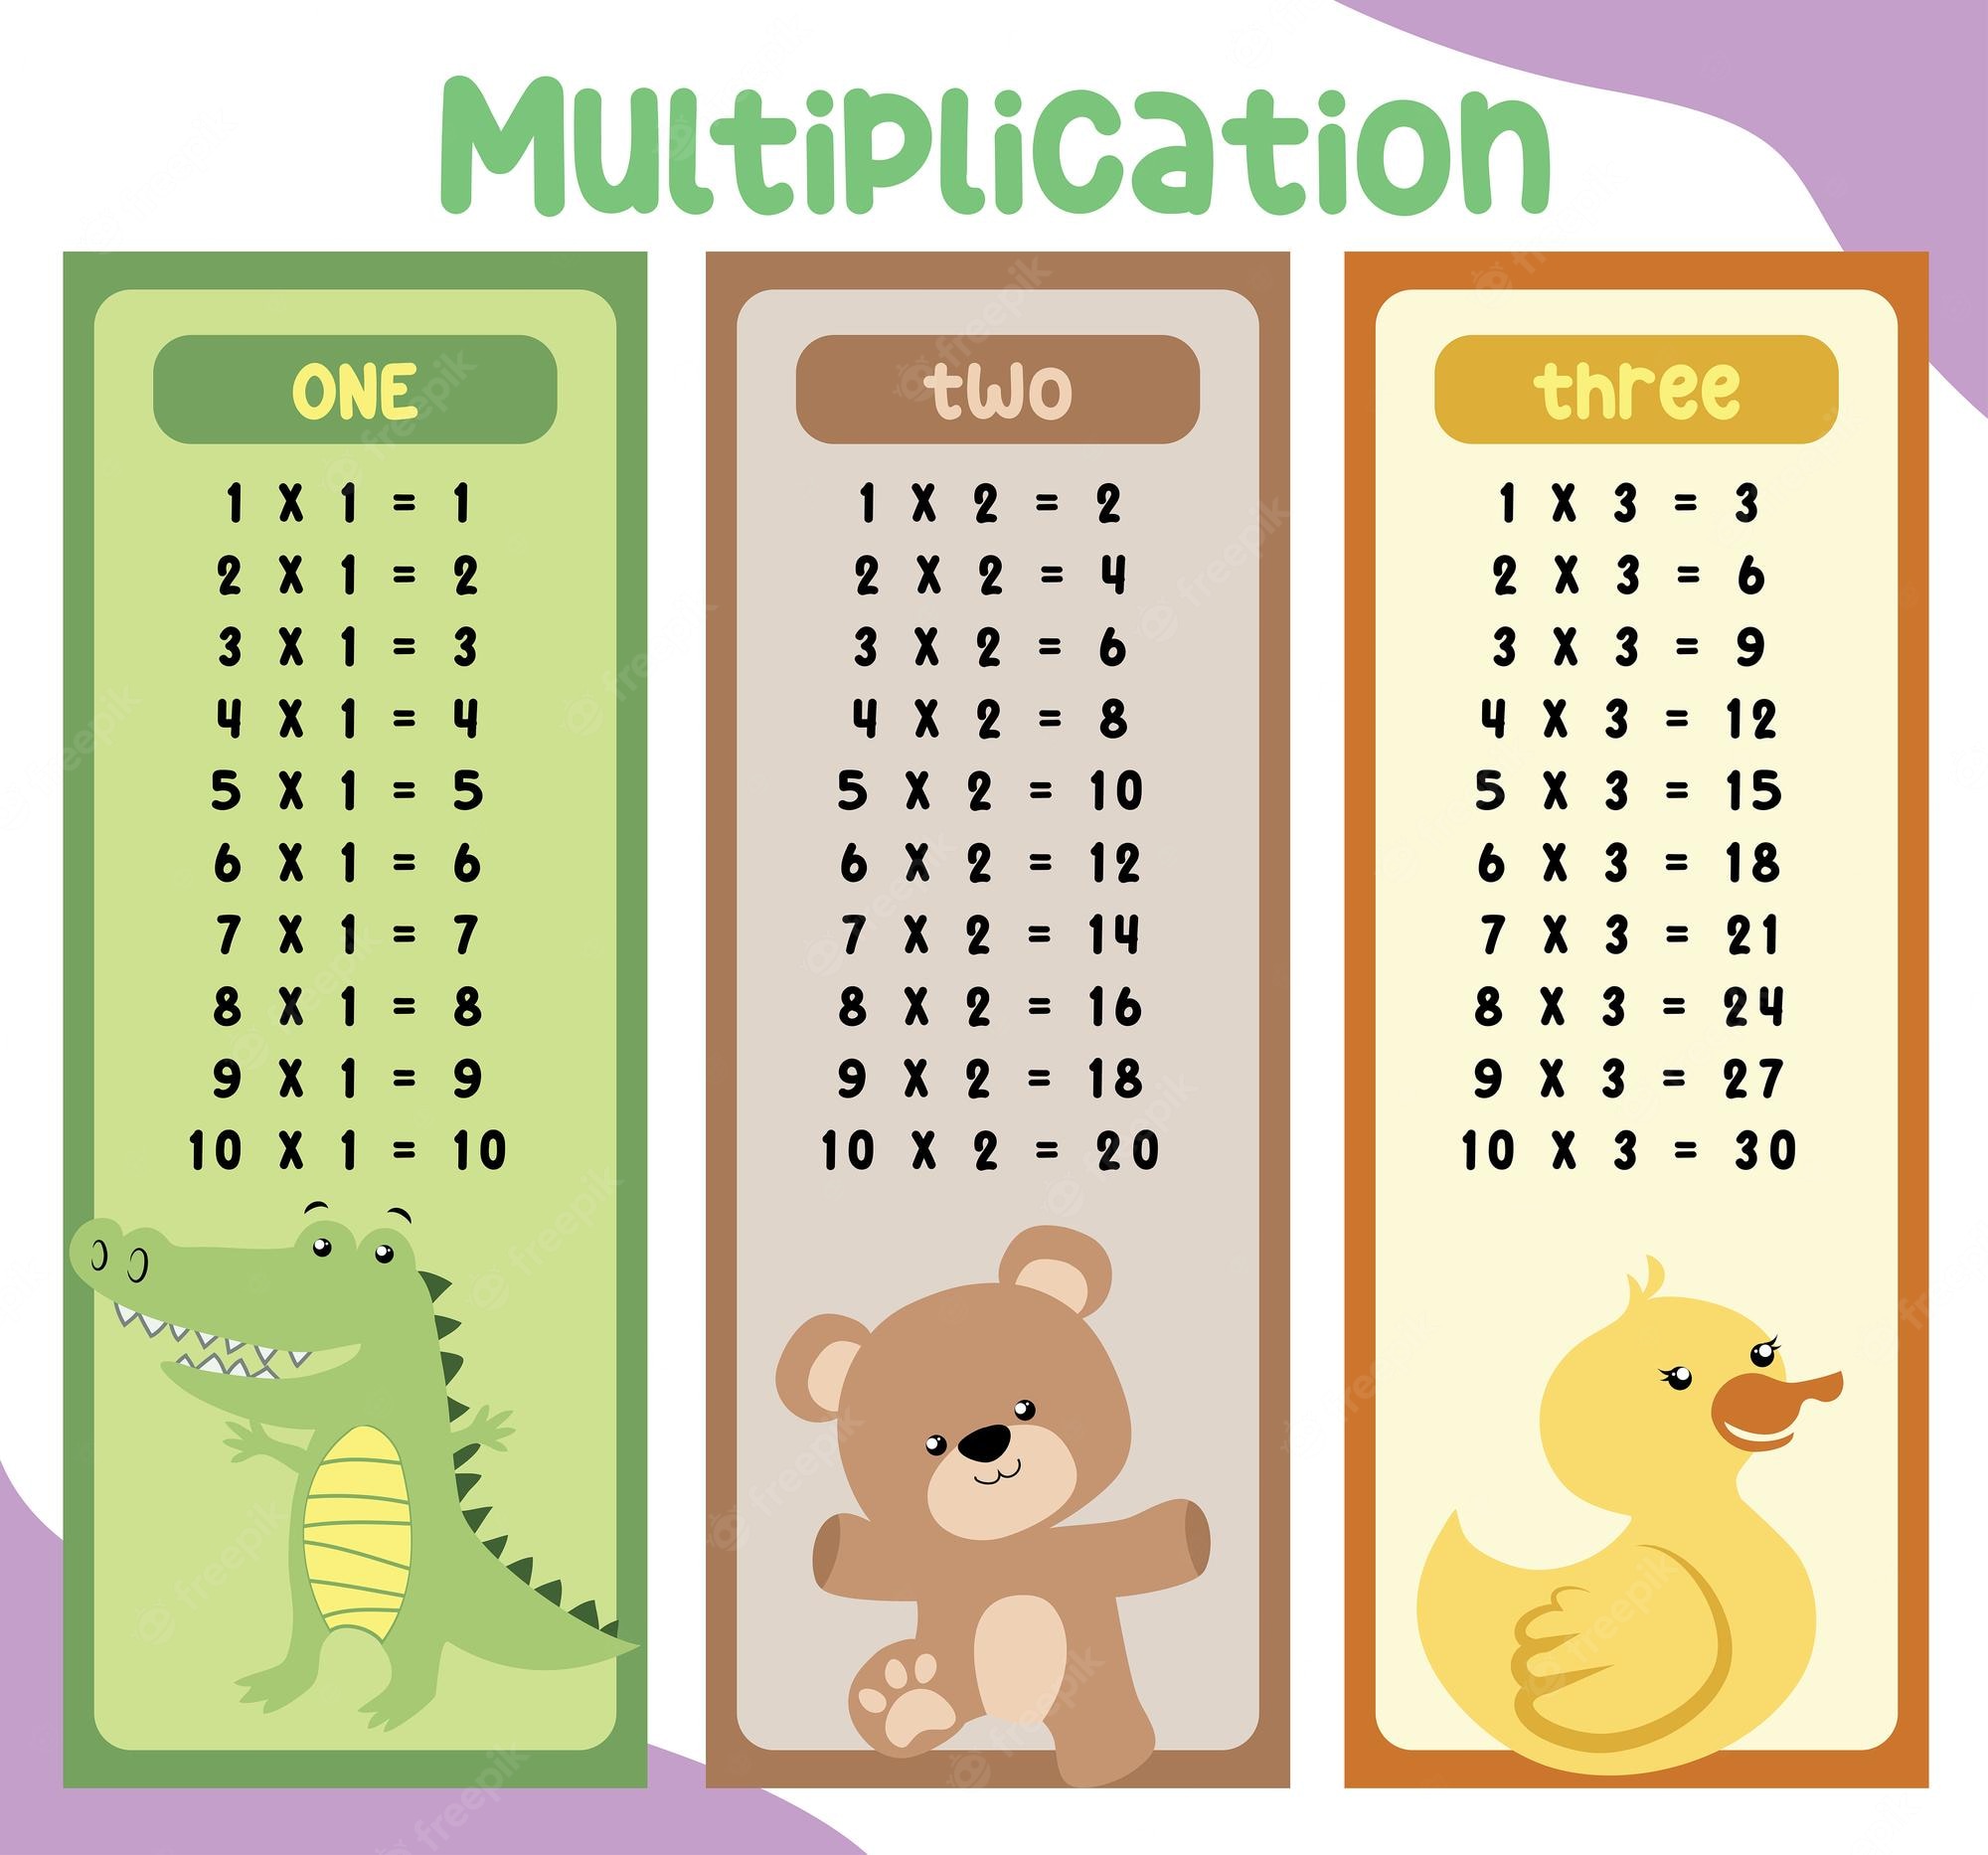 Multiplication tables Image. Free Vectors, & PSD